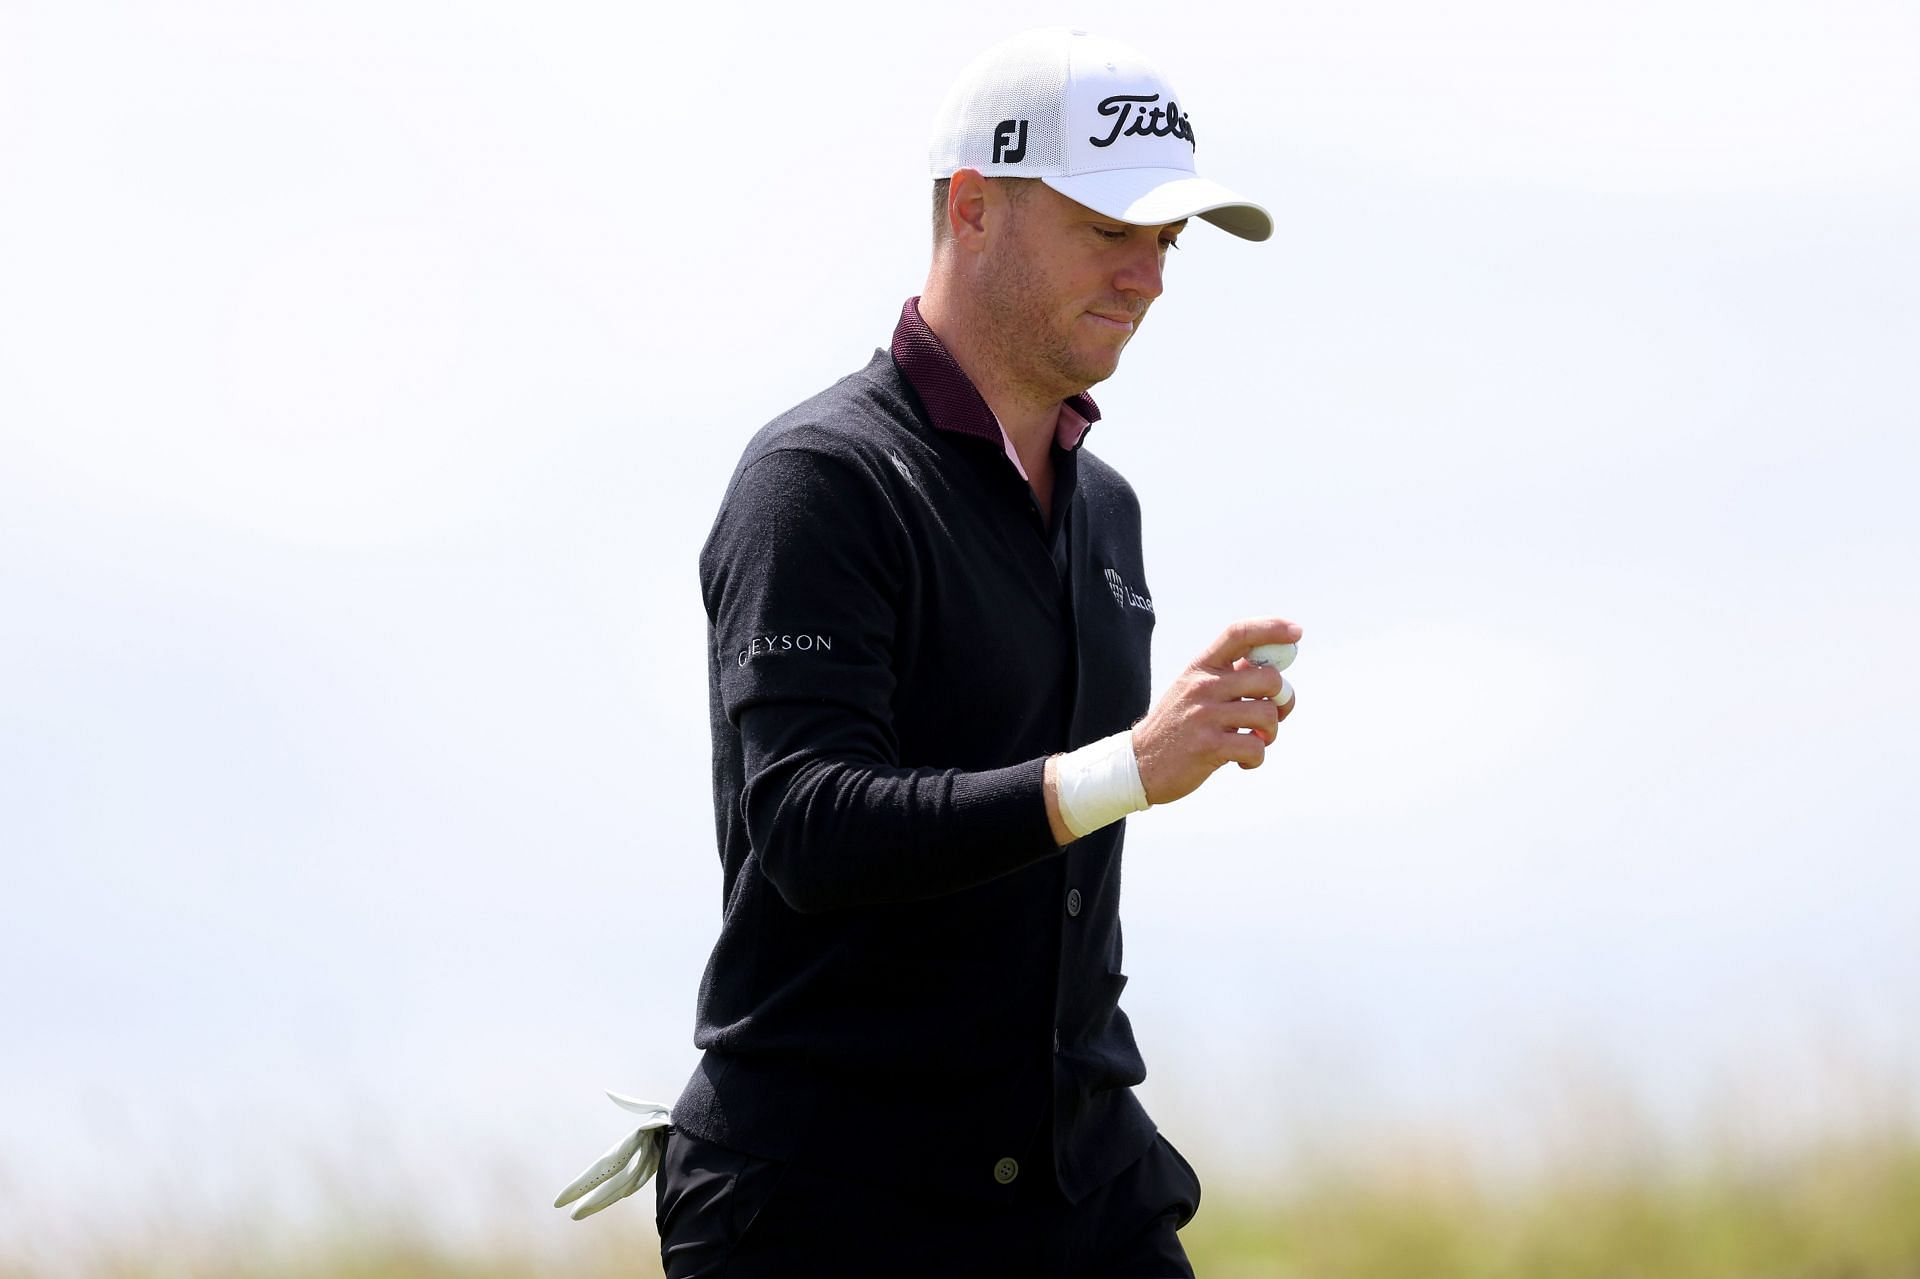 Justin Thomas at The British Open (via Getty Images)